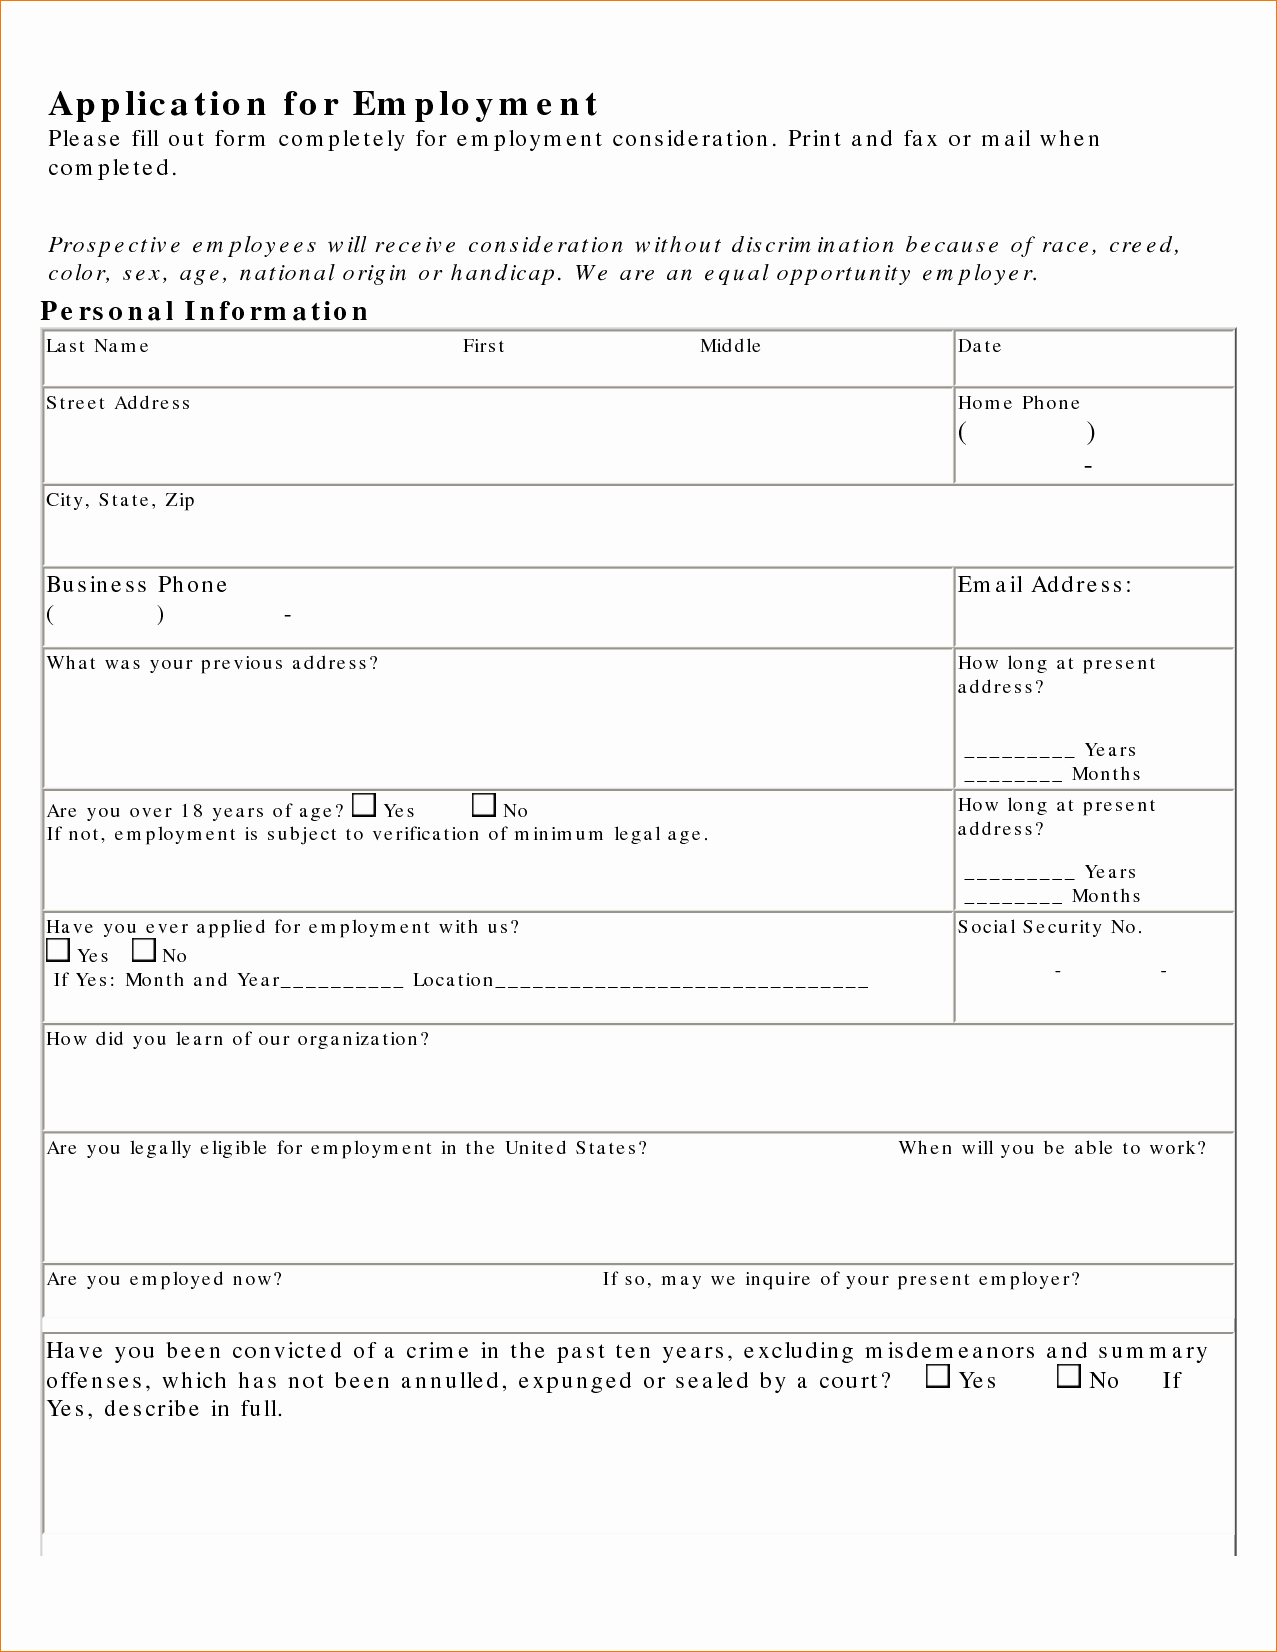 Application for Employment form Free Fresh 14 Free Printable Job Application formagenda Template